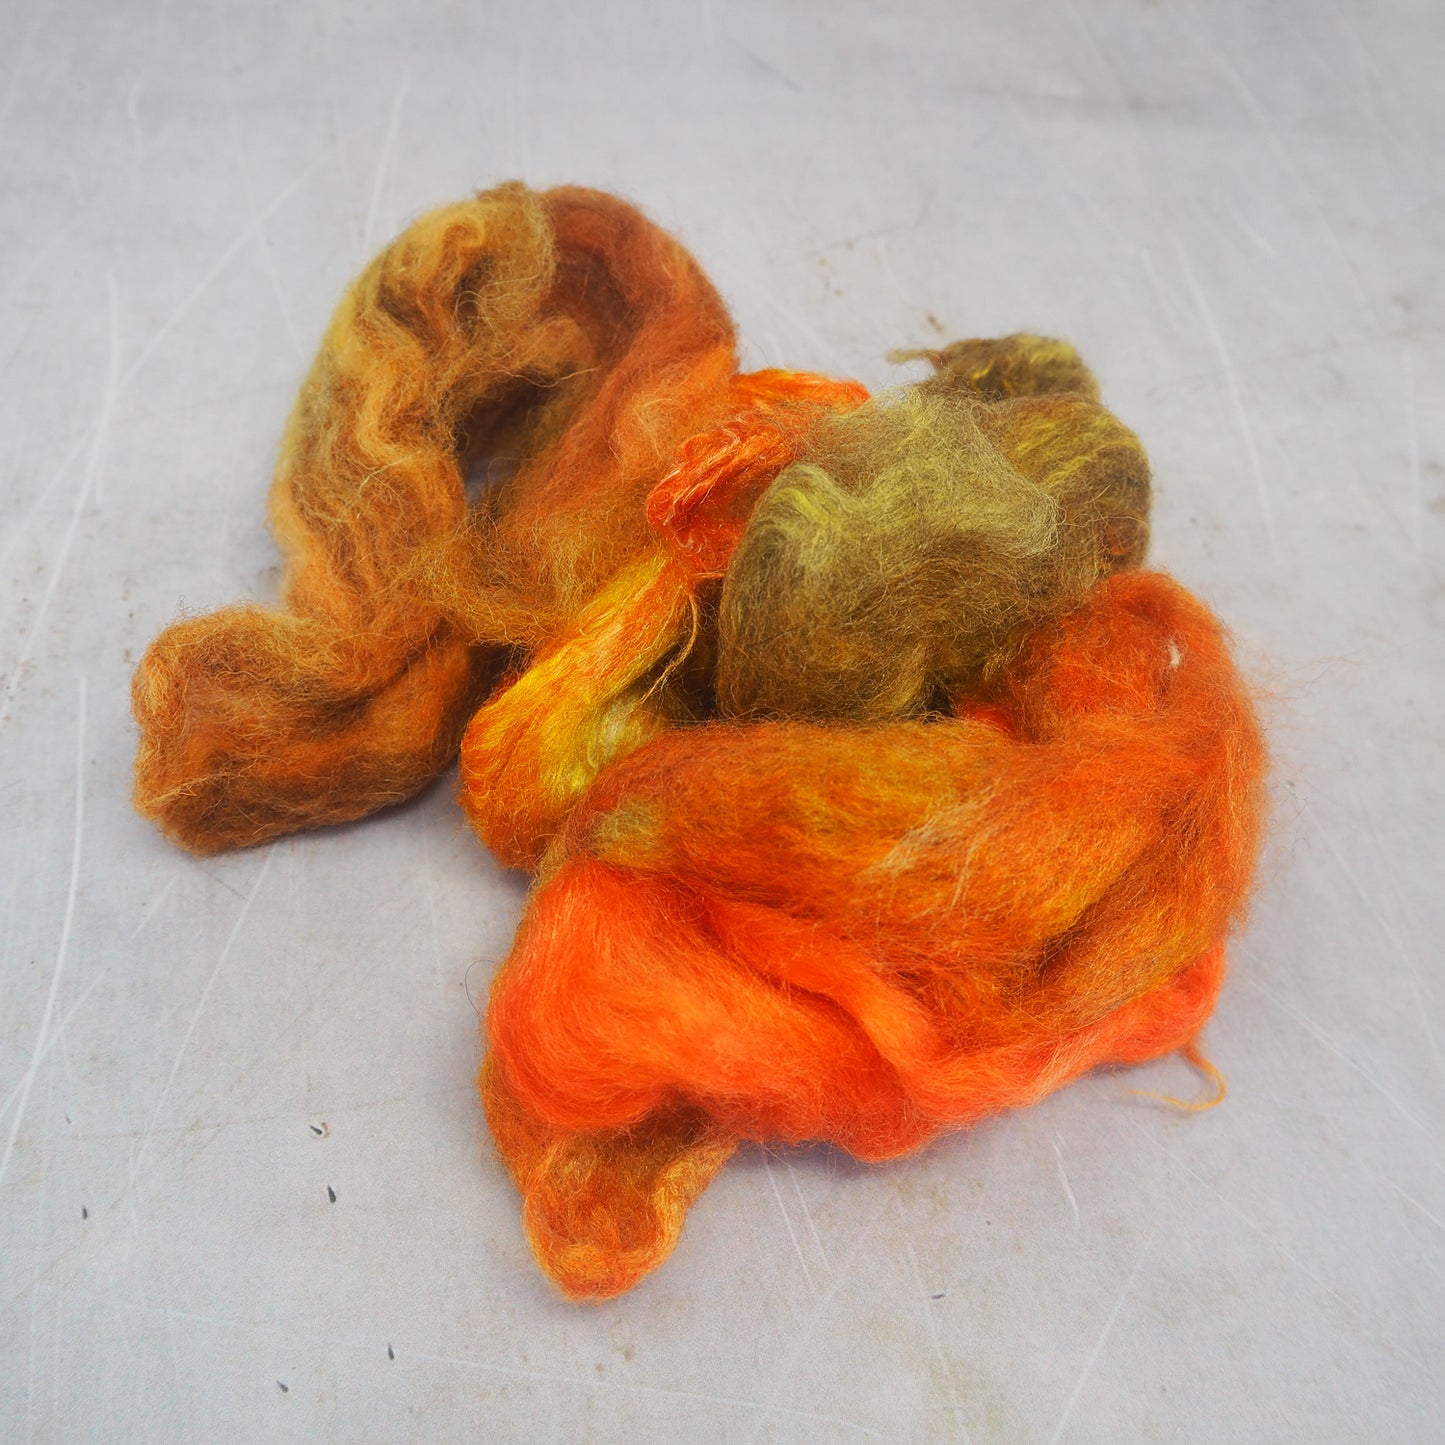 Mix it Up Packs - 25g - Hand dyed fibre